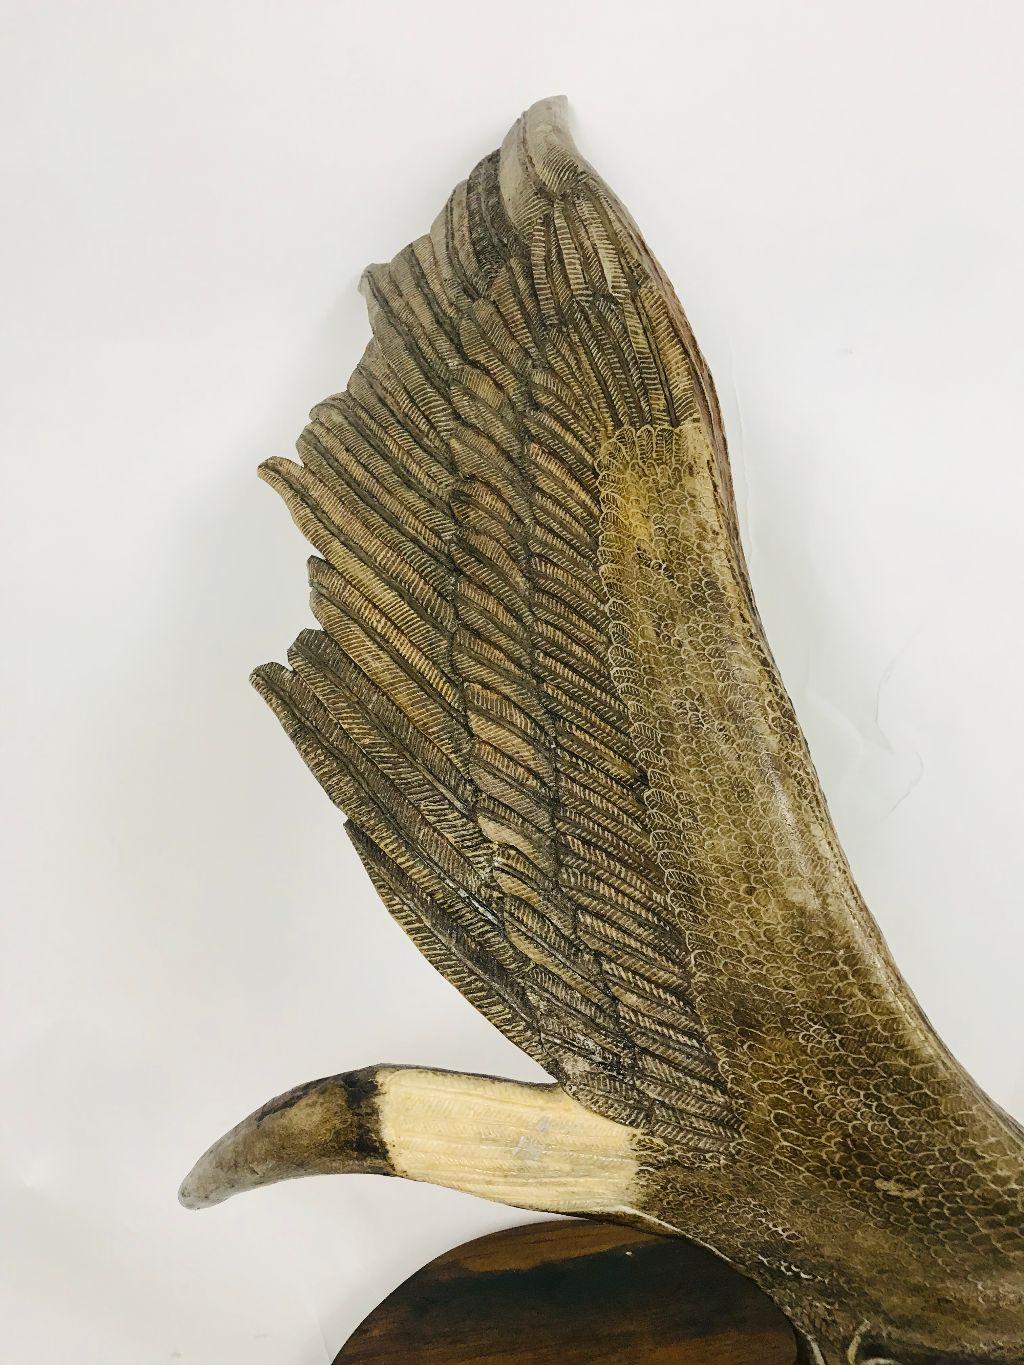 This elk Horn which has been carved into an eagle in flight is a dramatic and unusual piece. It is attached to a wooden base with a plaque which reads 